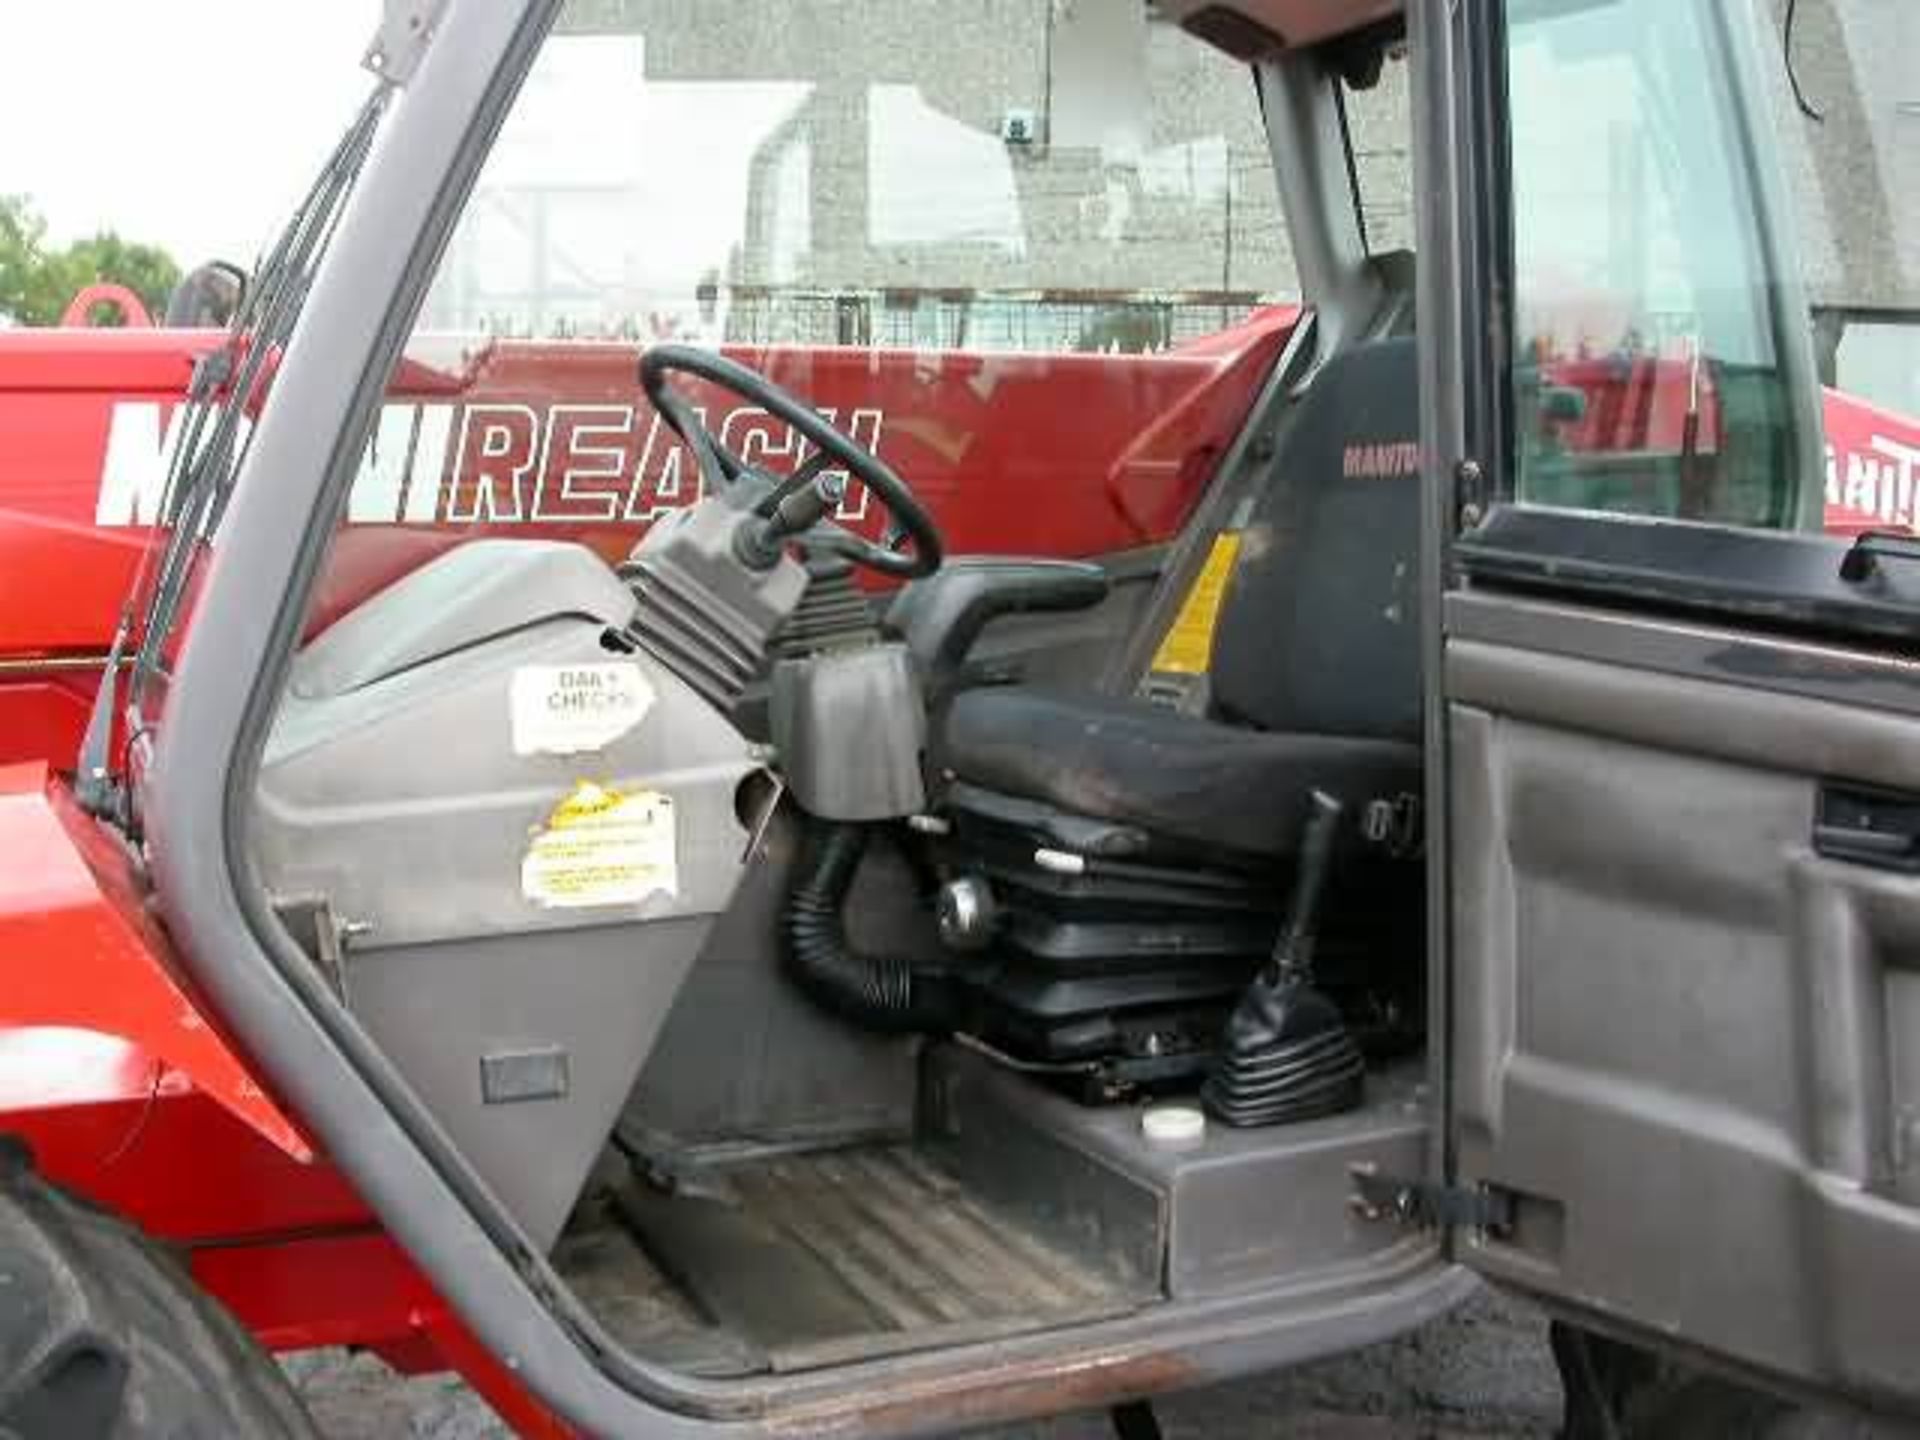 1998 Manitou 628 Turbo with Pick Up Hitch - Image 5 of 5